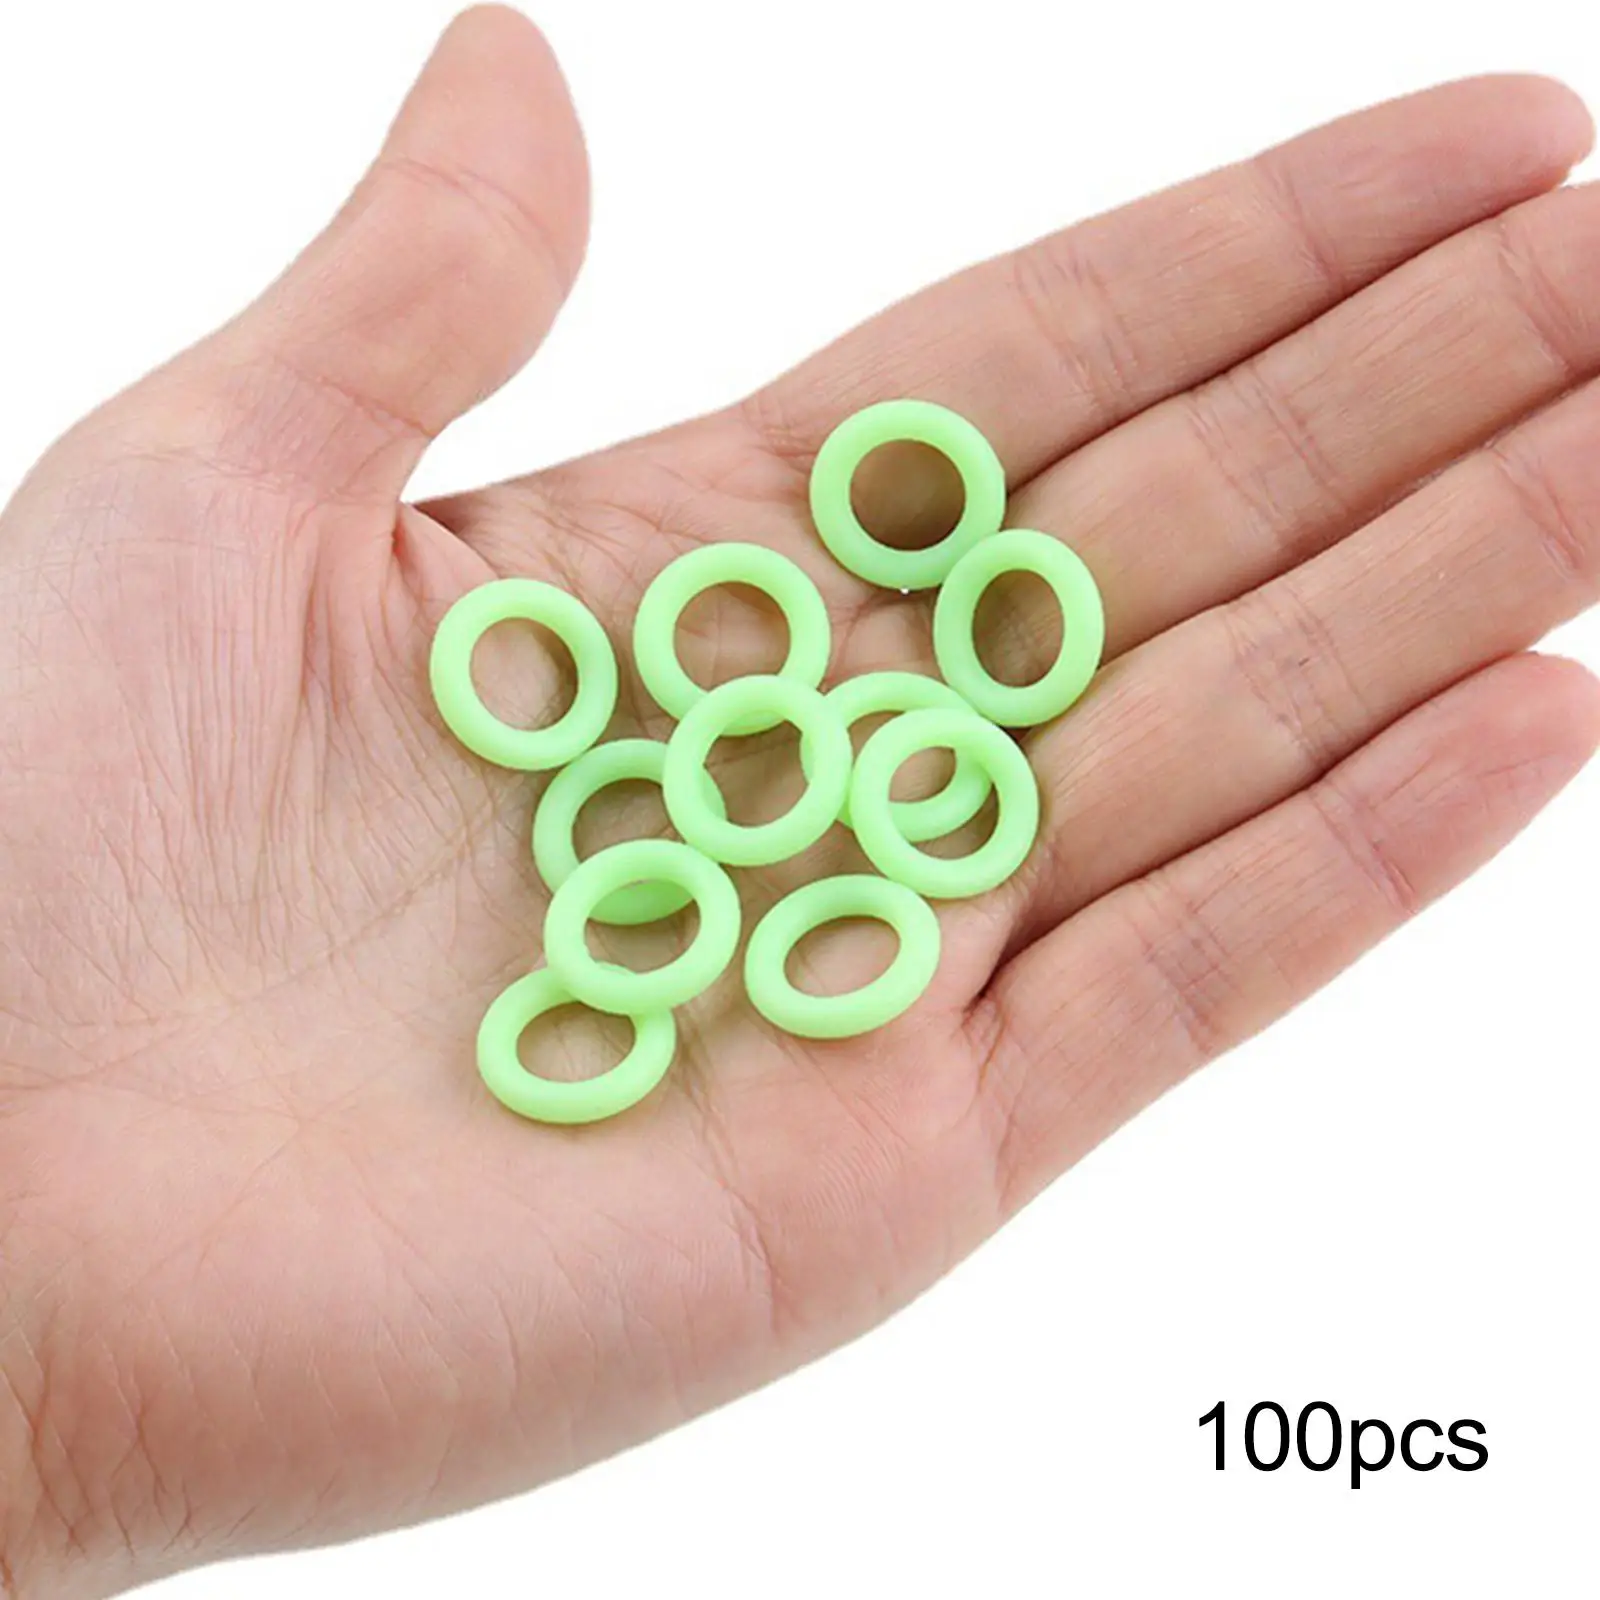 100Pcs Tent Stake Rings Luminous Glow in The Dark 15mm Tent Peg Rings Tent Nail Rings Tent Stake Accessories for Outdoor Camping